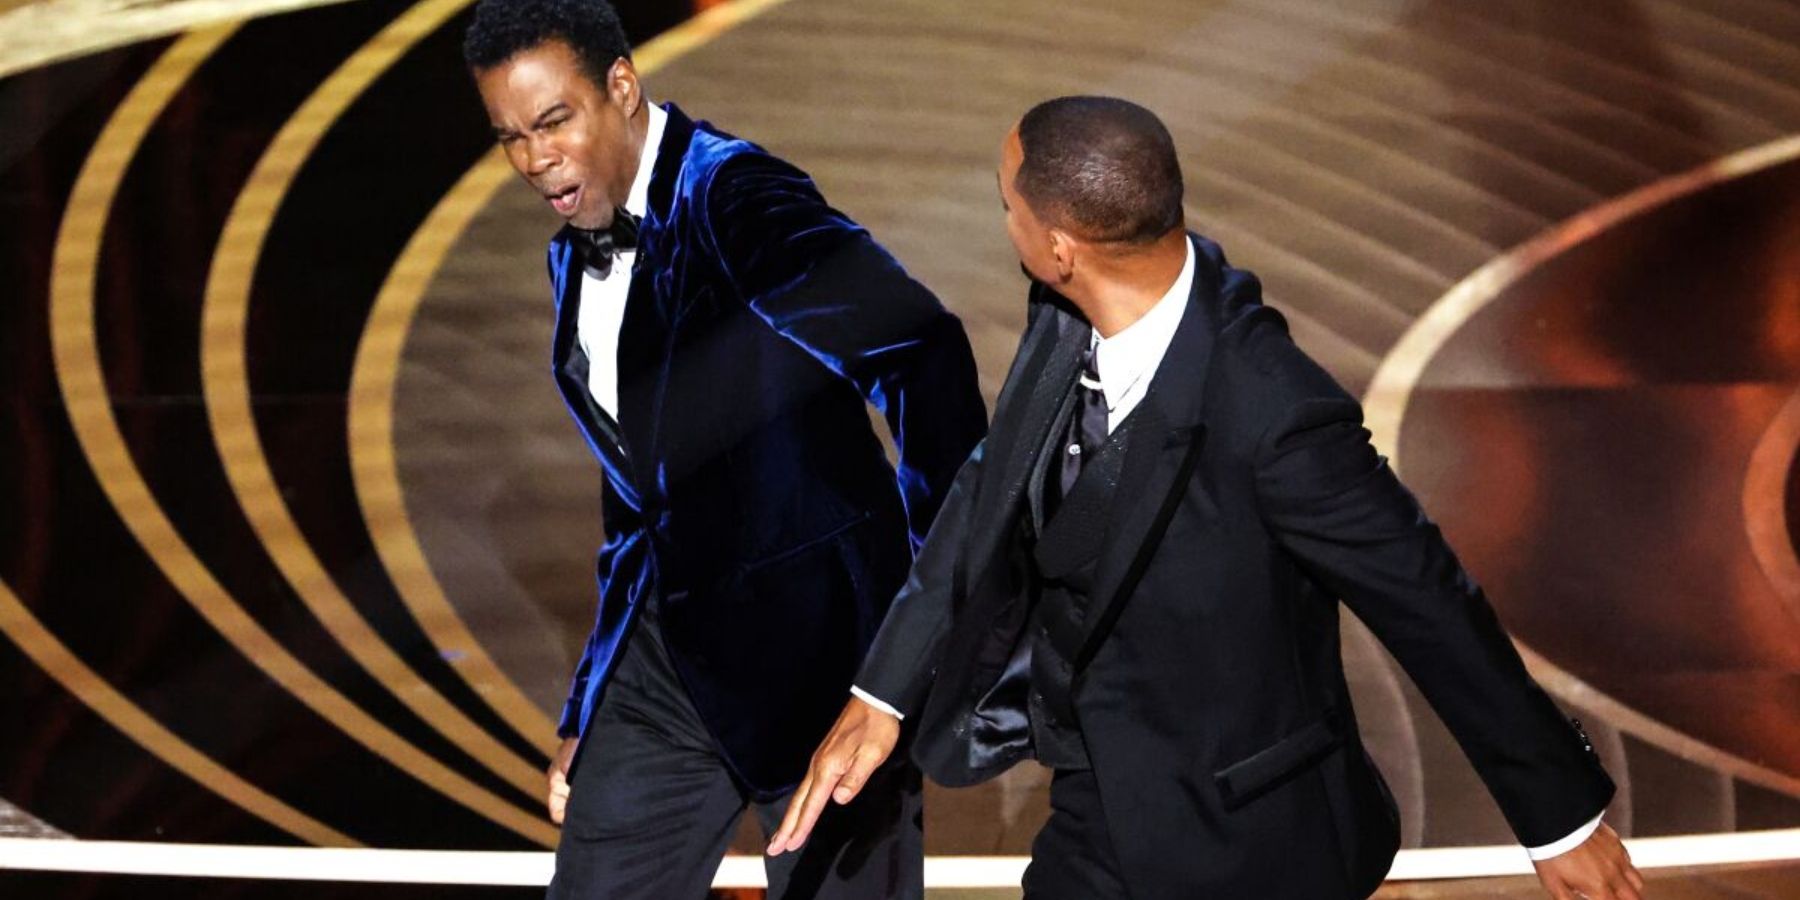 Oscars_Chris Rock and Will Smith Dispute